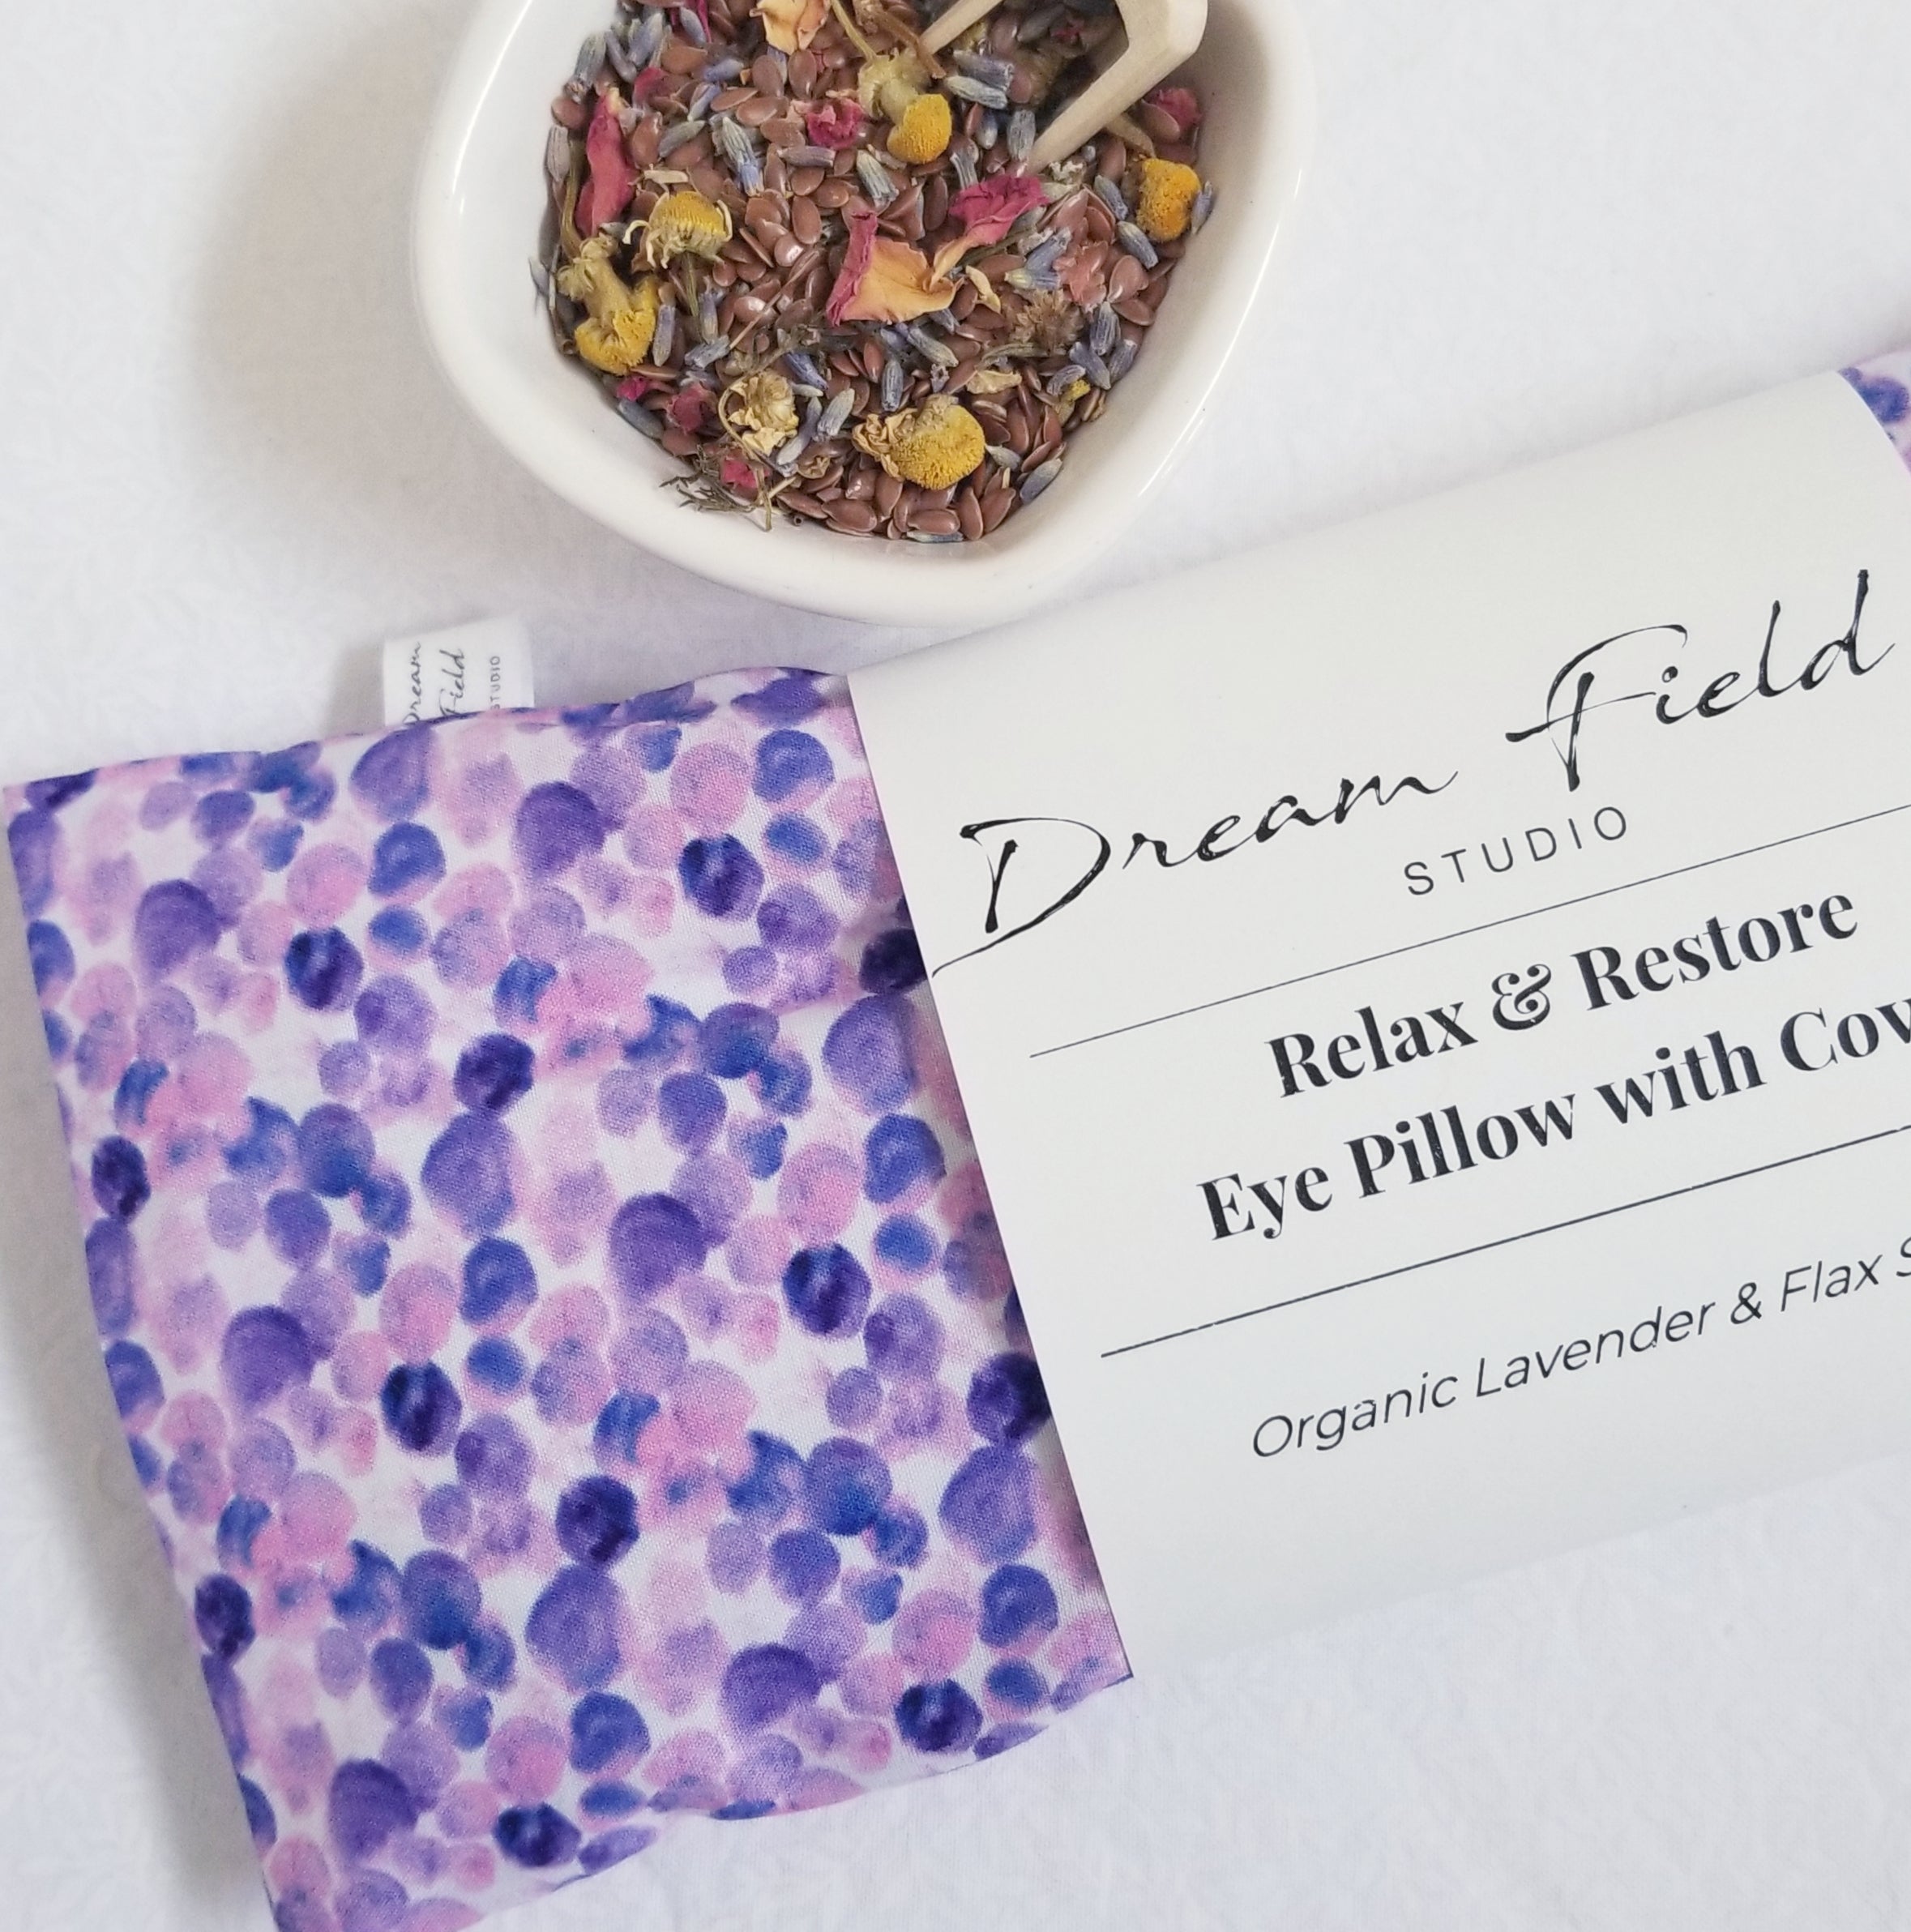 Organic lavender eye pillow with purple dot cotton cover and white bowl filled with herbs